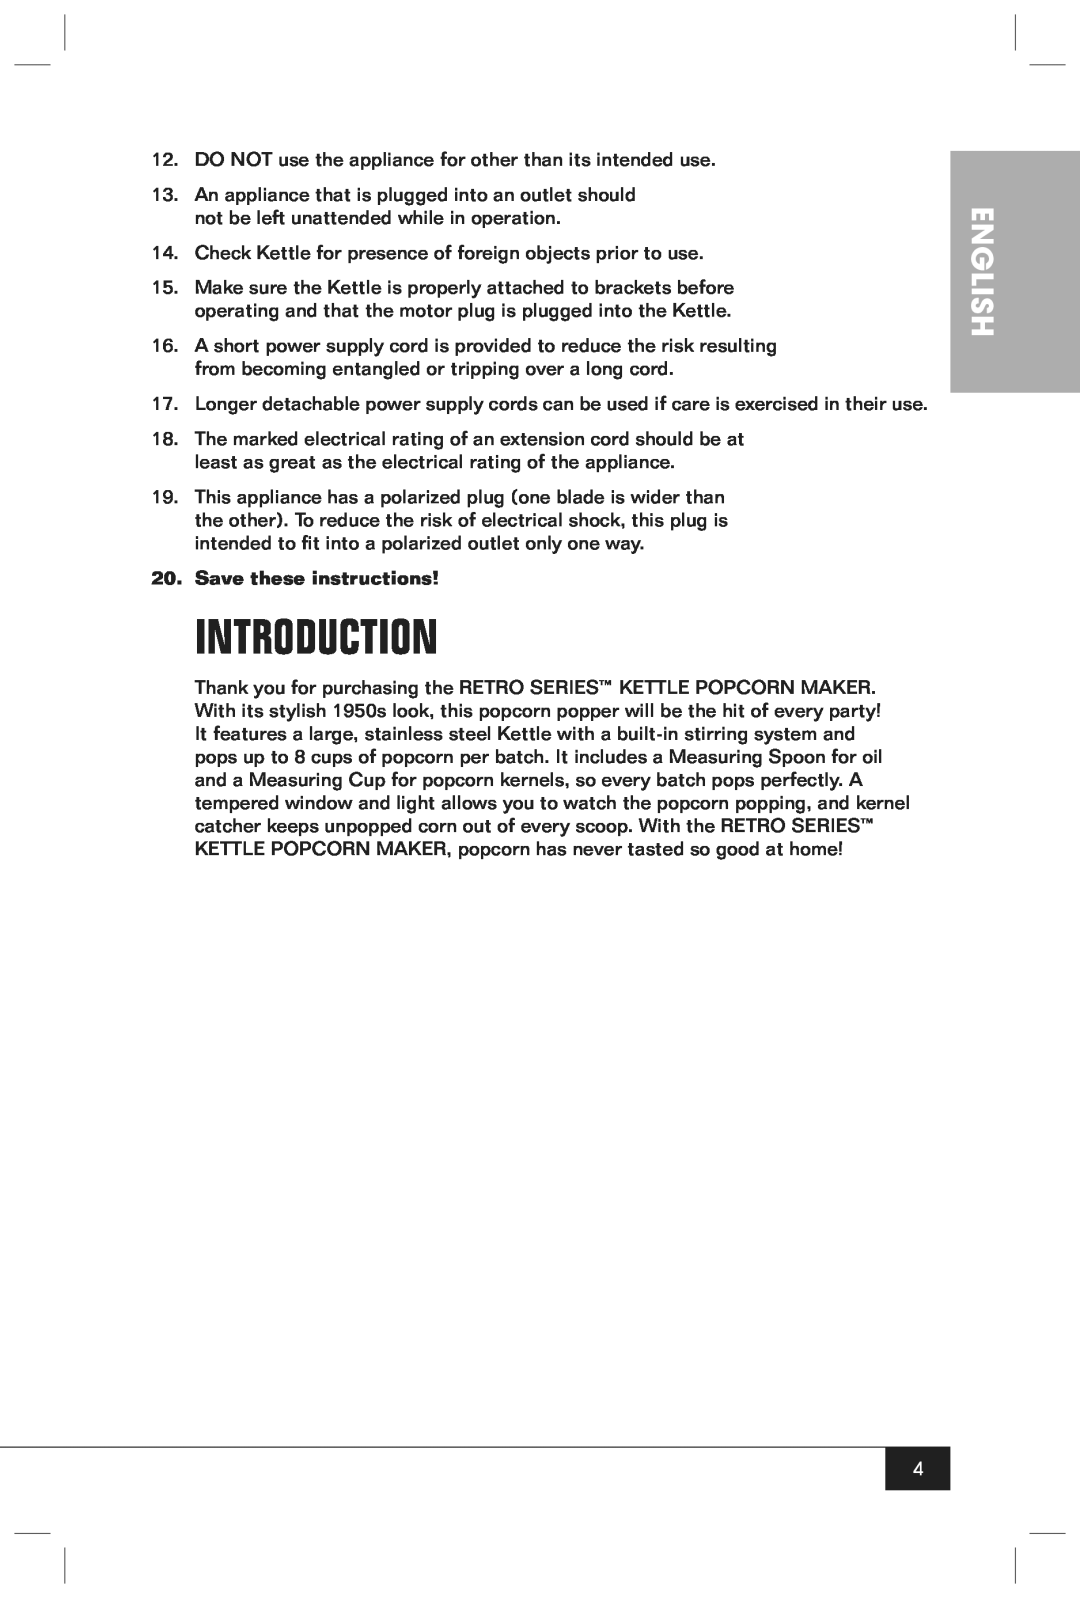 Nostalgia Electrics RKP630SERIES manual Introduction, English, Save these instructions 